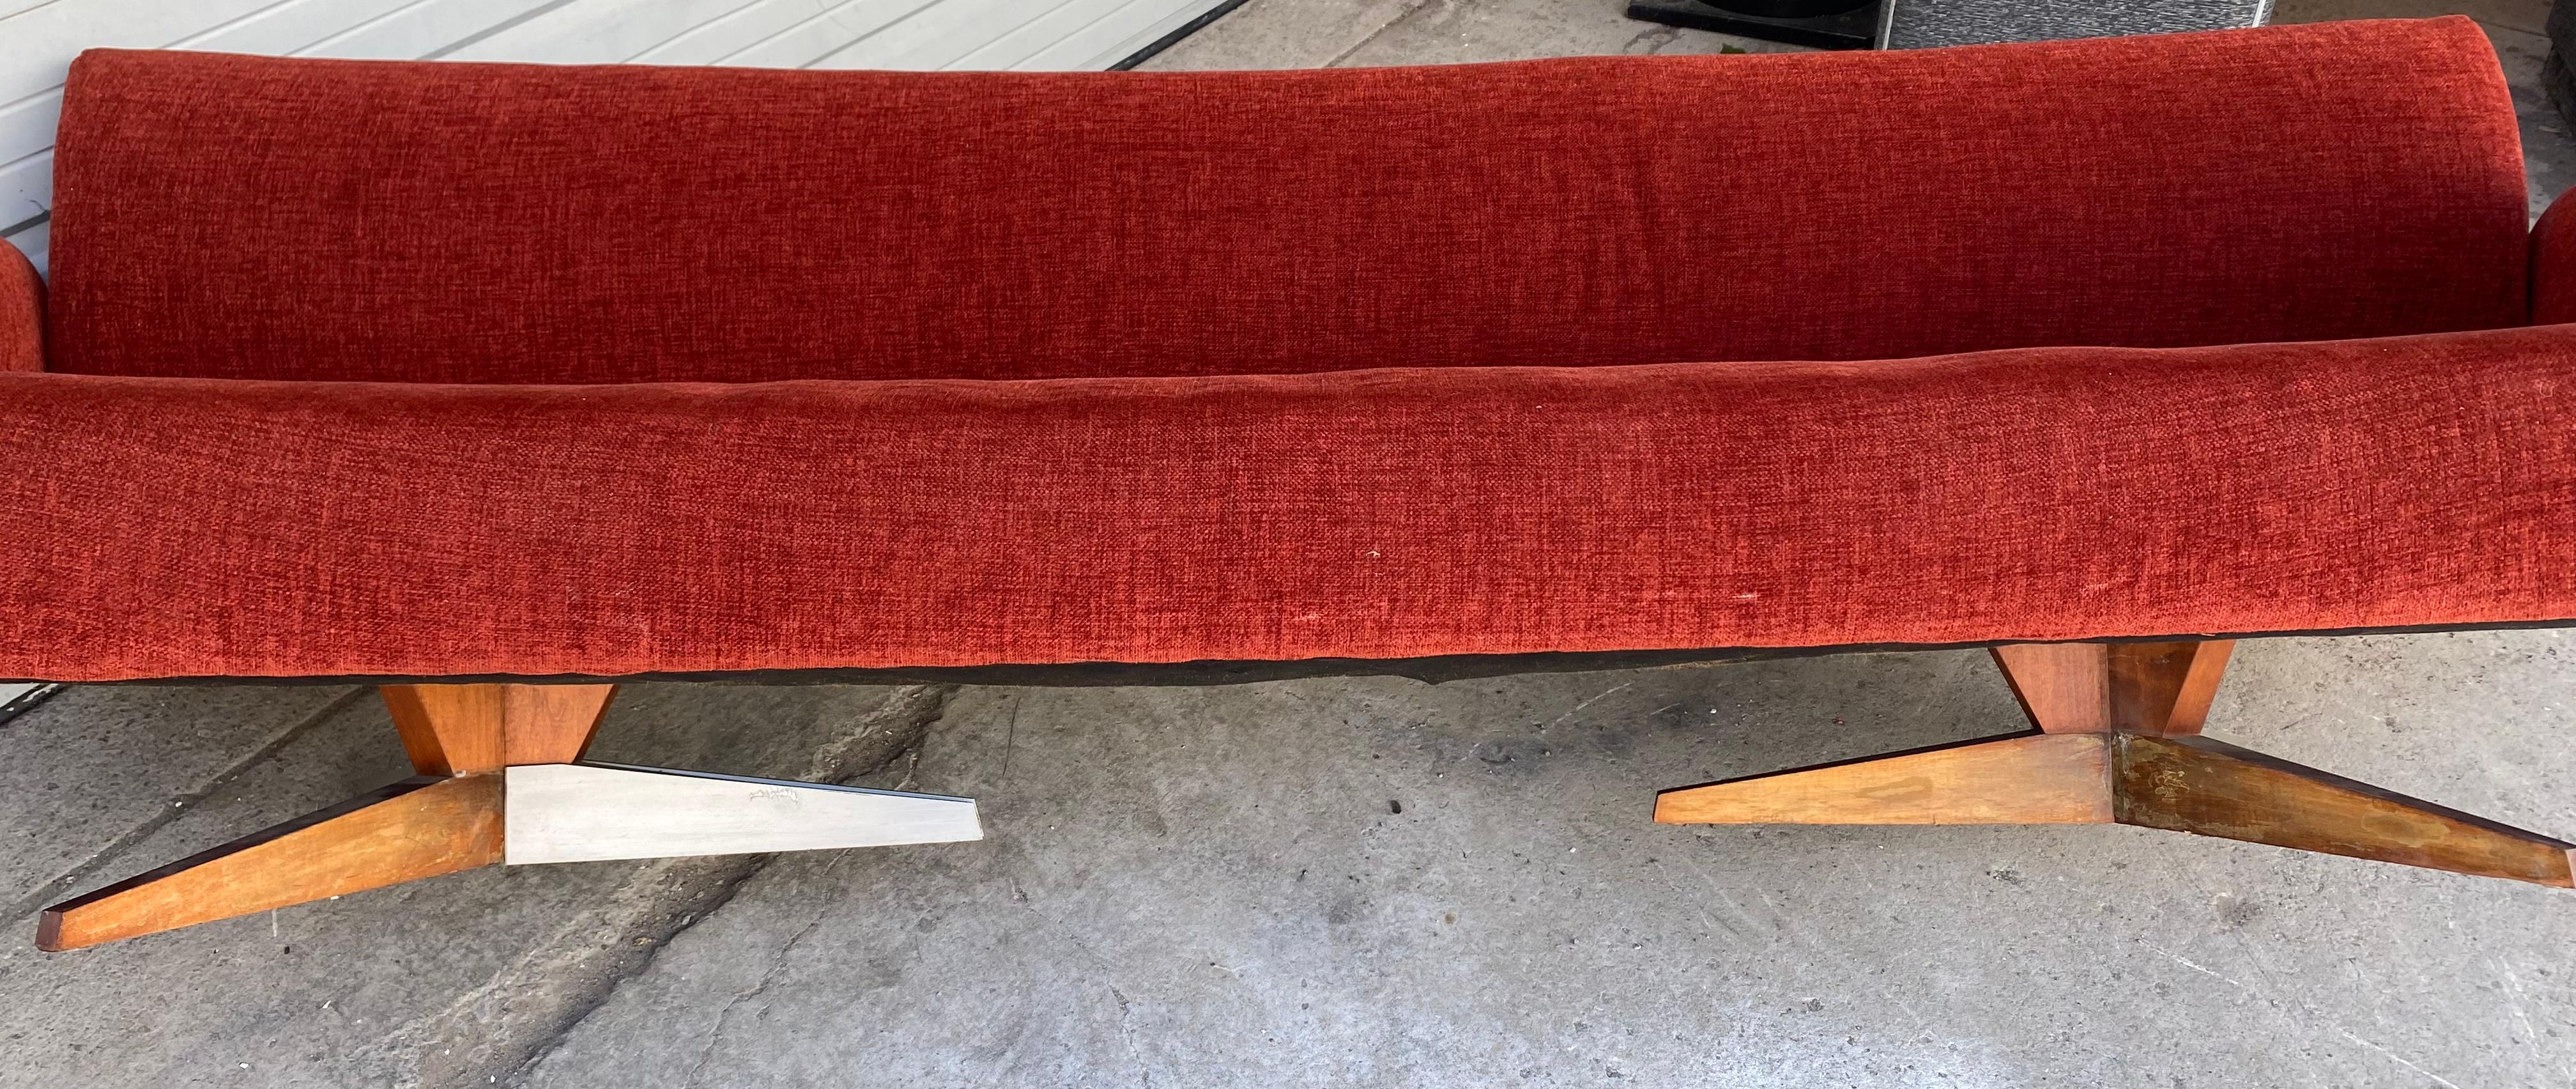 Stunning Mid Century Modern Sofa attributed to Jens Risom For Sale 3